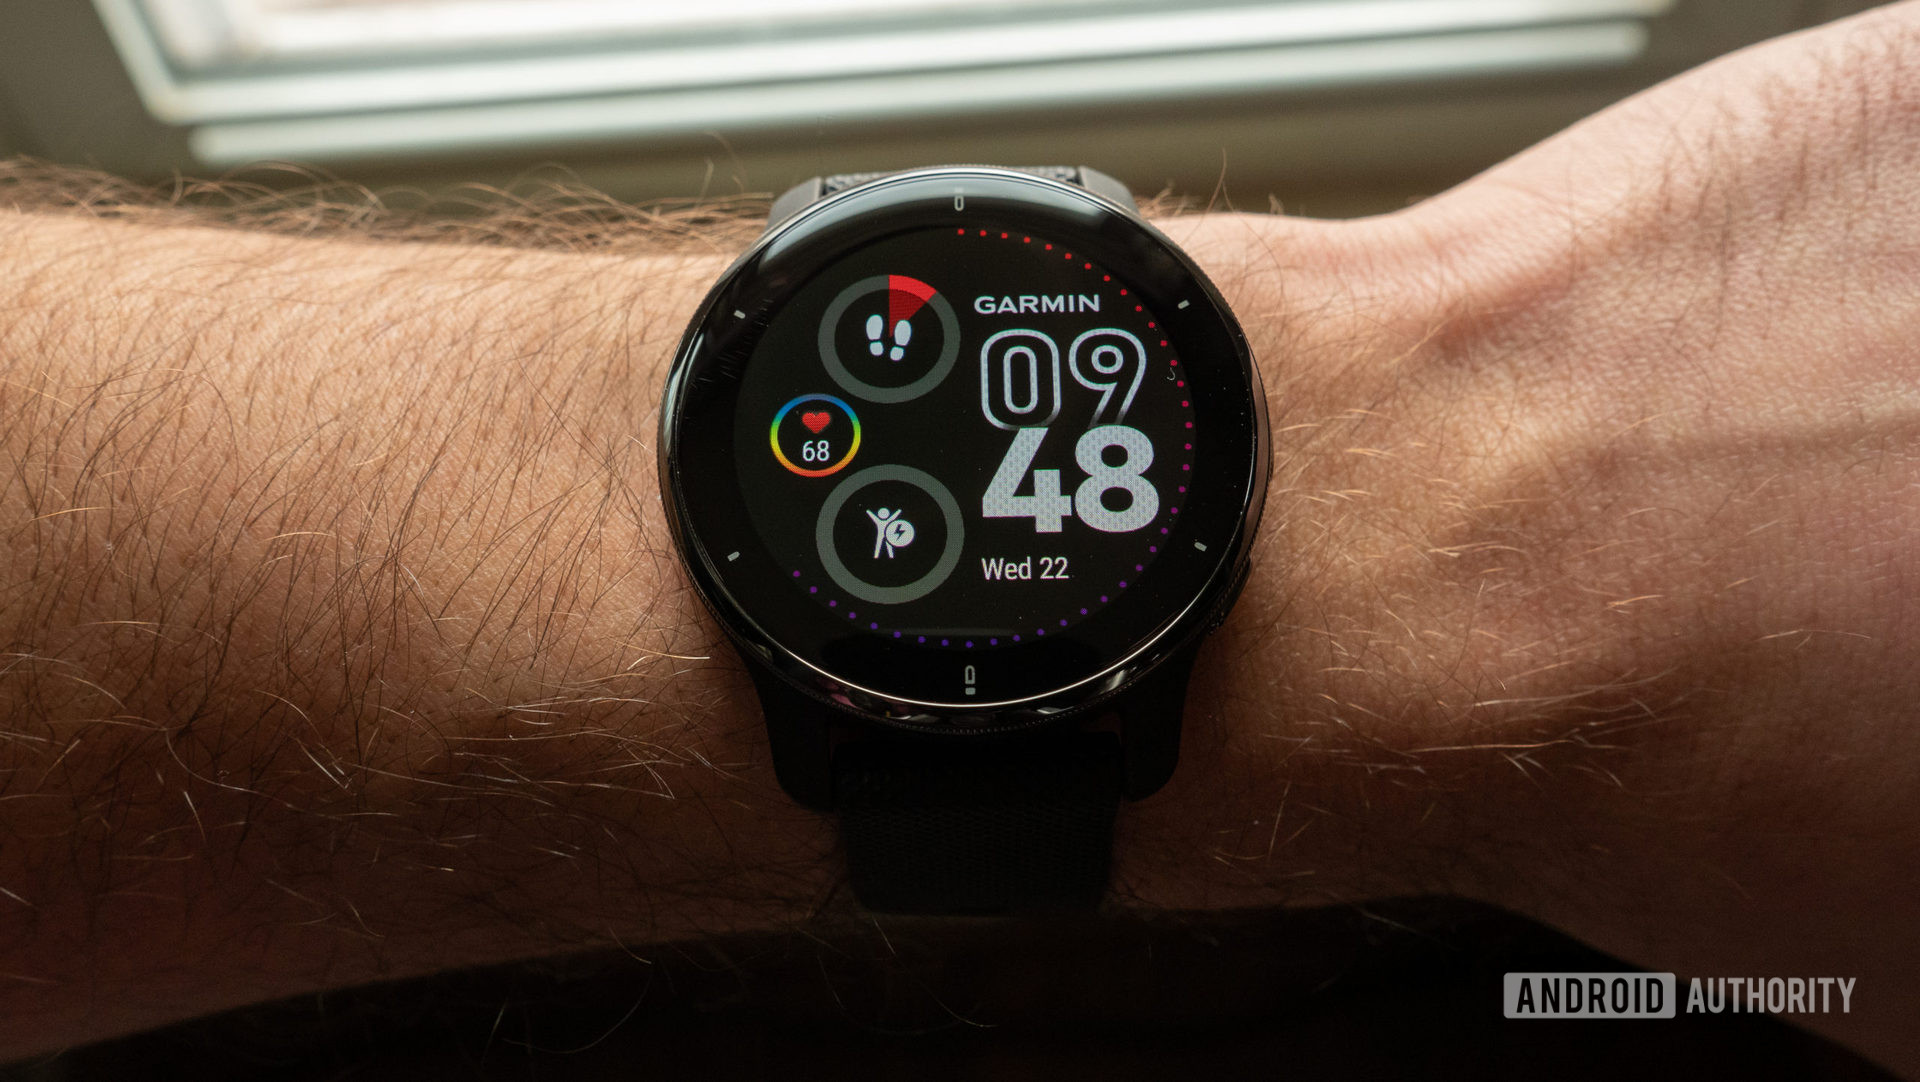 An image of the Garmin Venu 2 Plus on the wrist showing the watch face and display